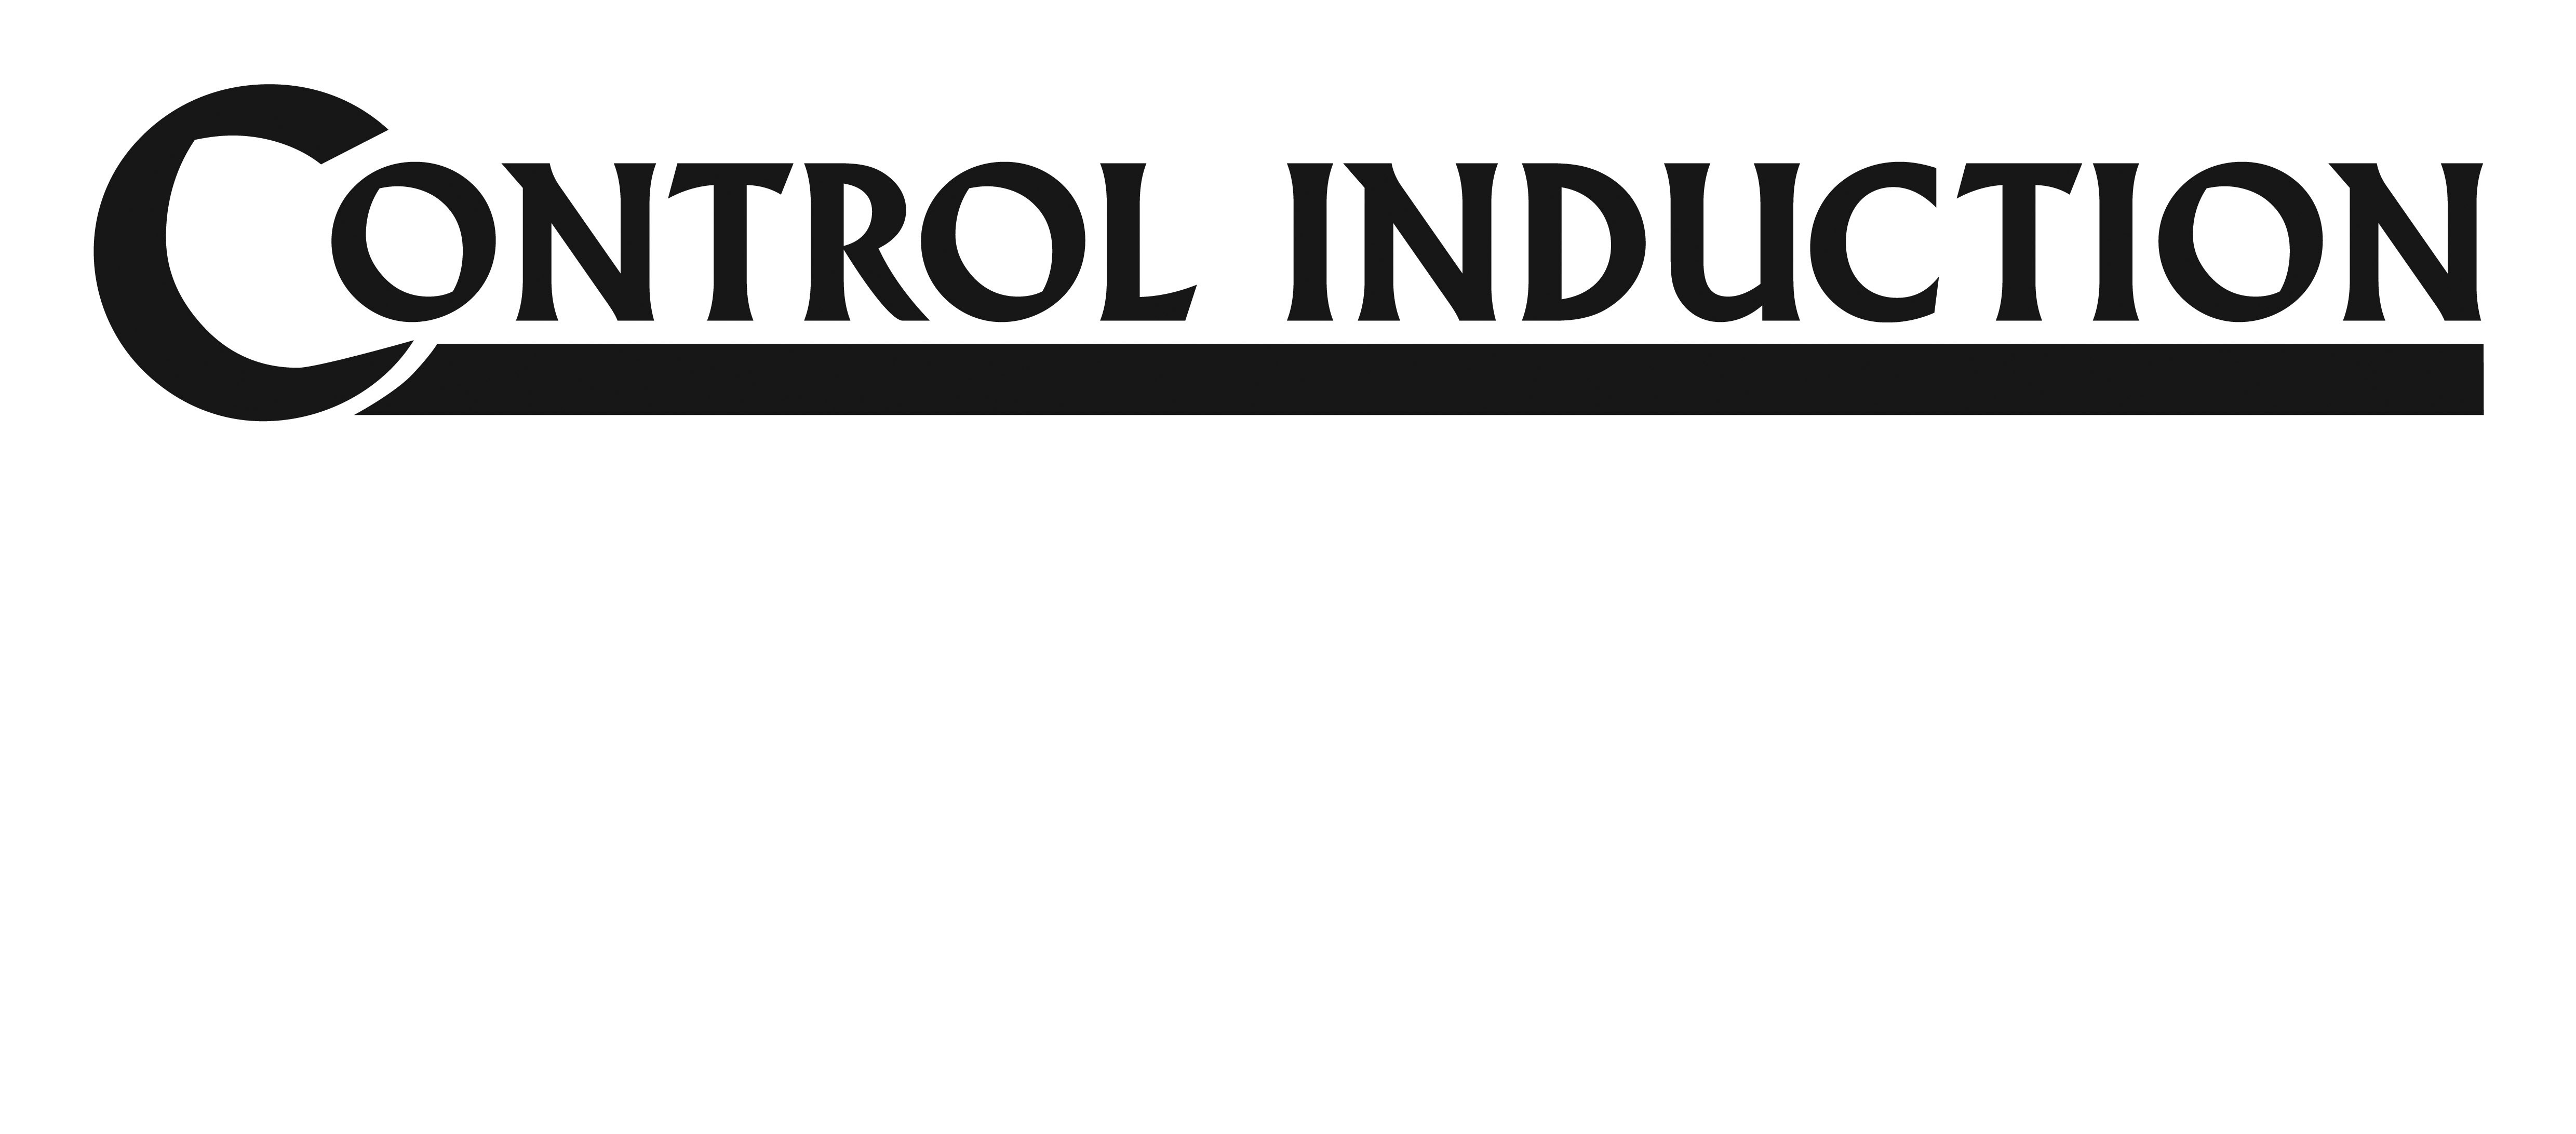 Control Induction